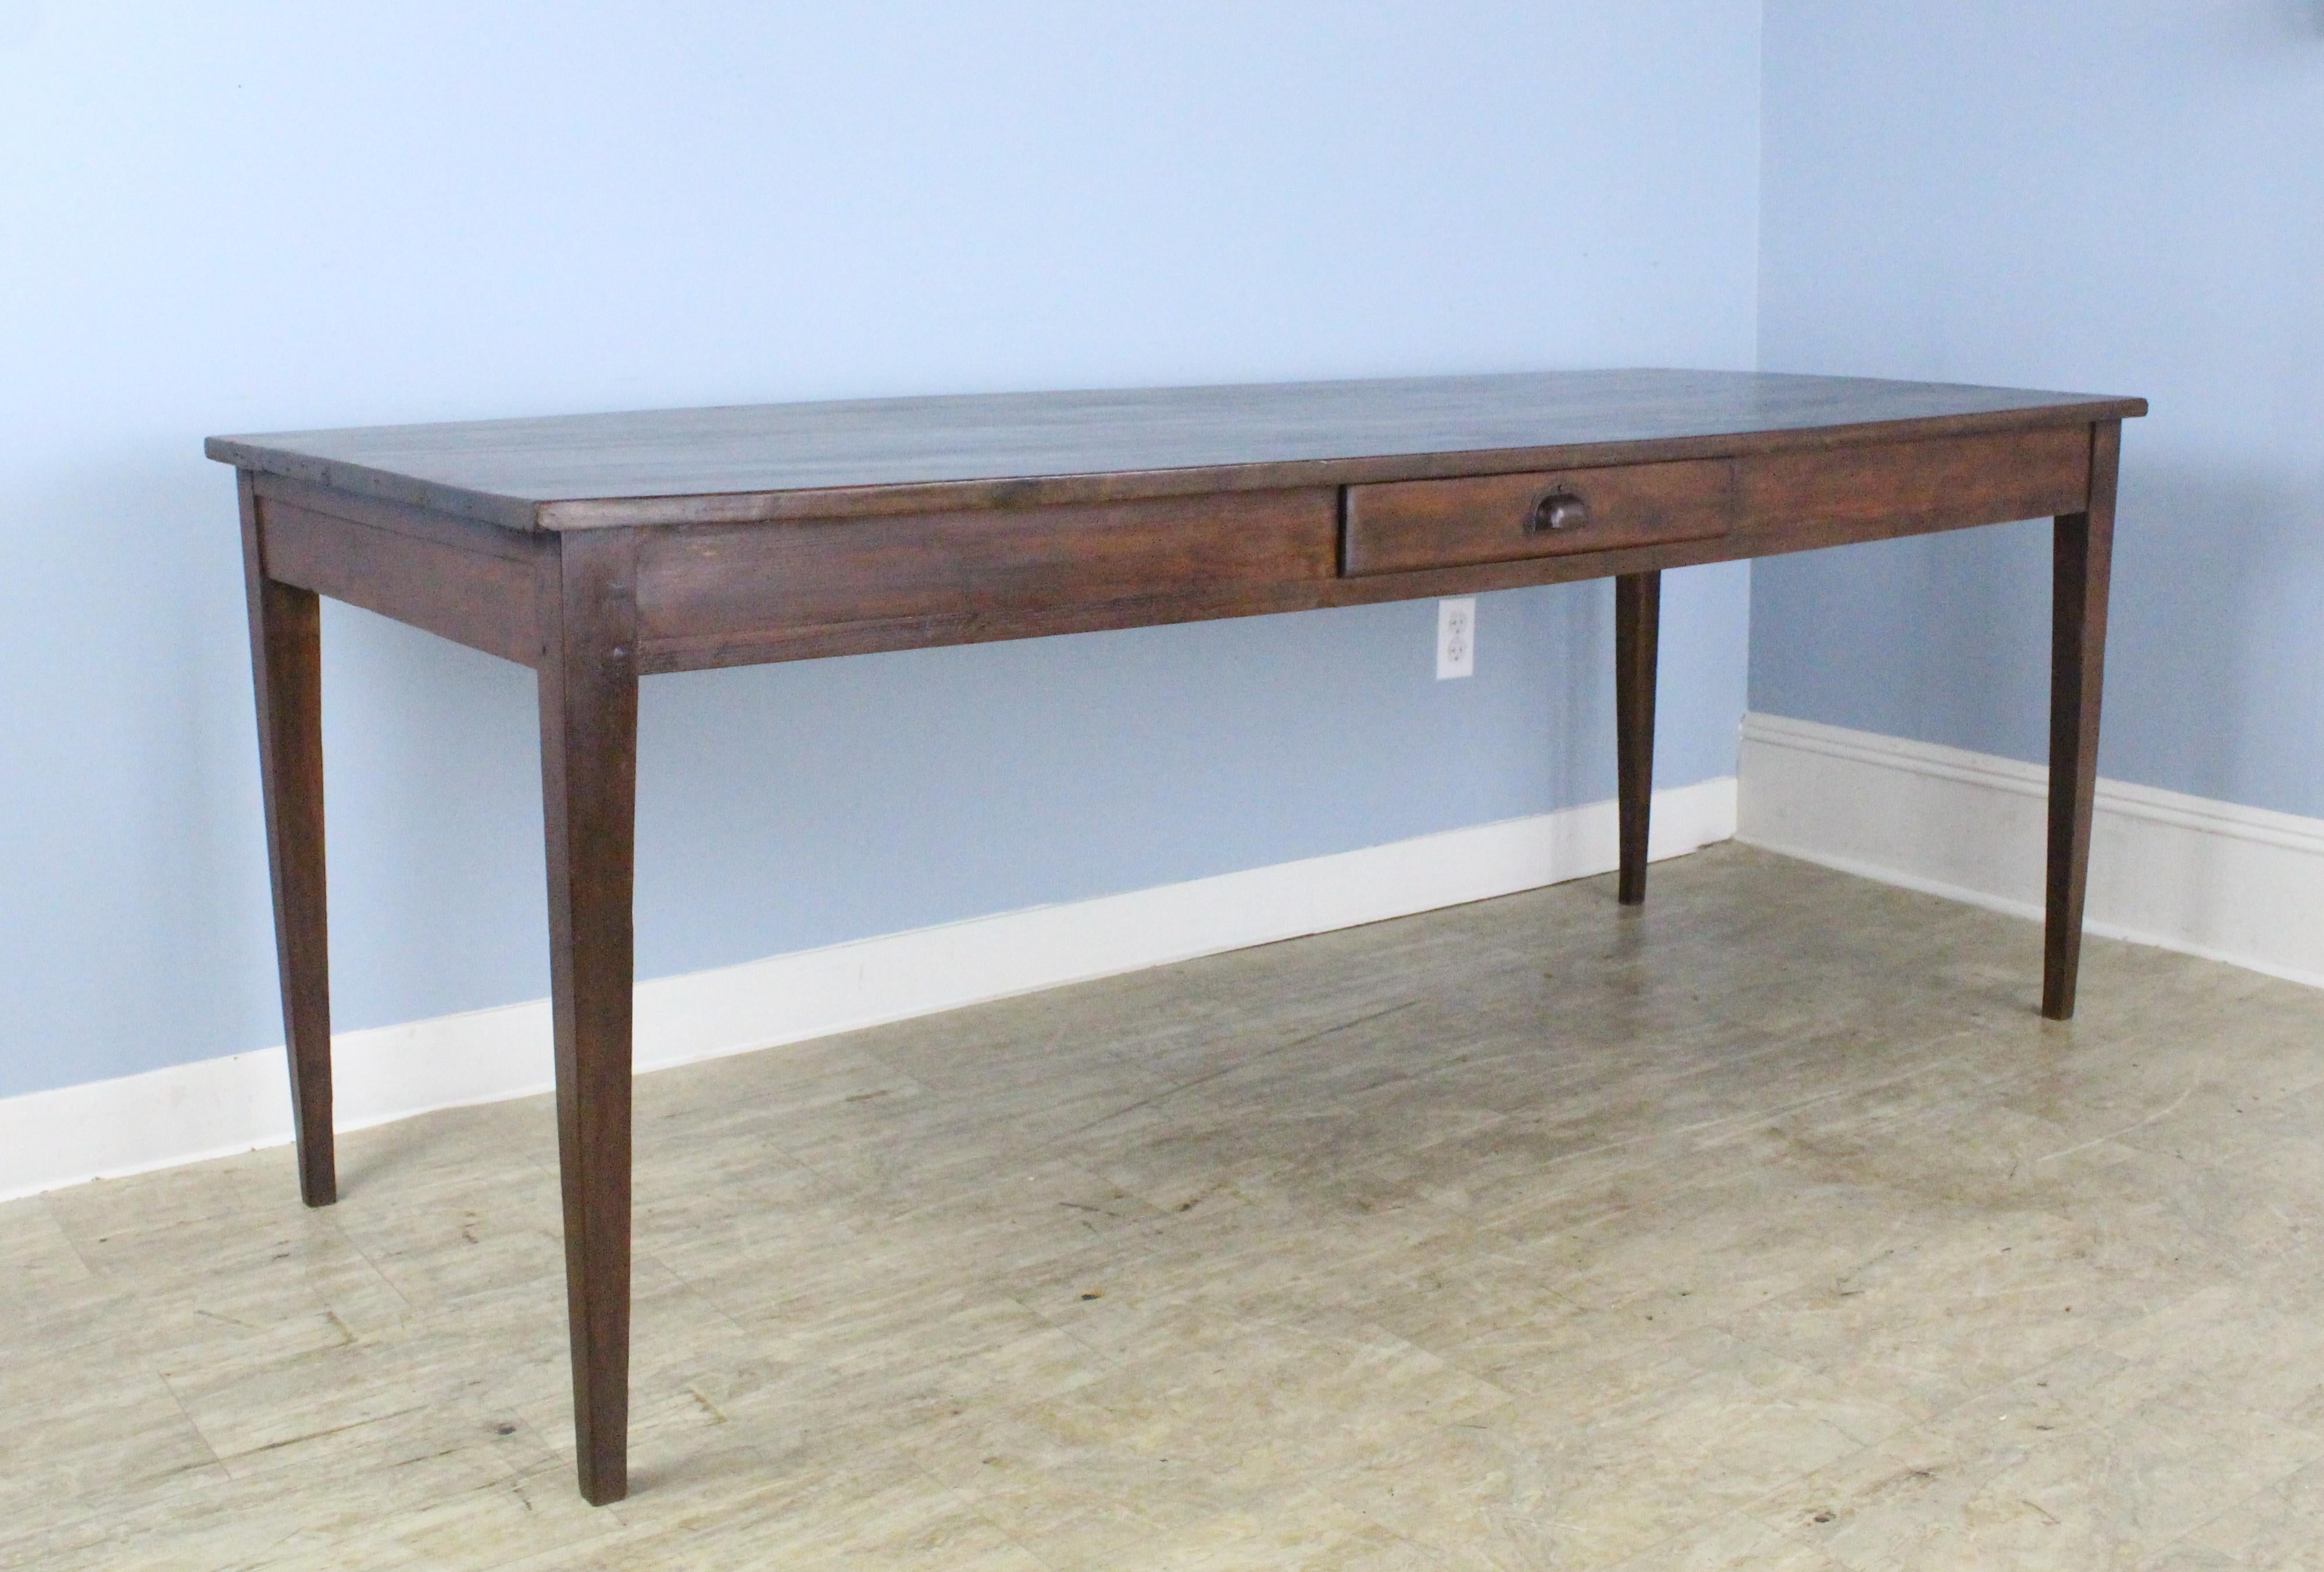 This handsome mid-brown fruitwood farm table is sturdy and elegant. Slender tapered legs and good grain. There is a useful drawer on one side. The apron height is a good 25